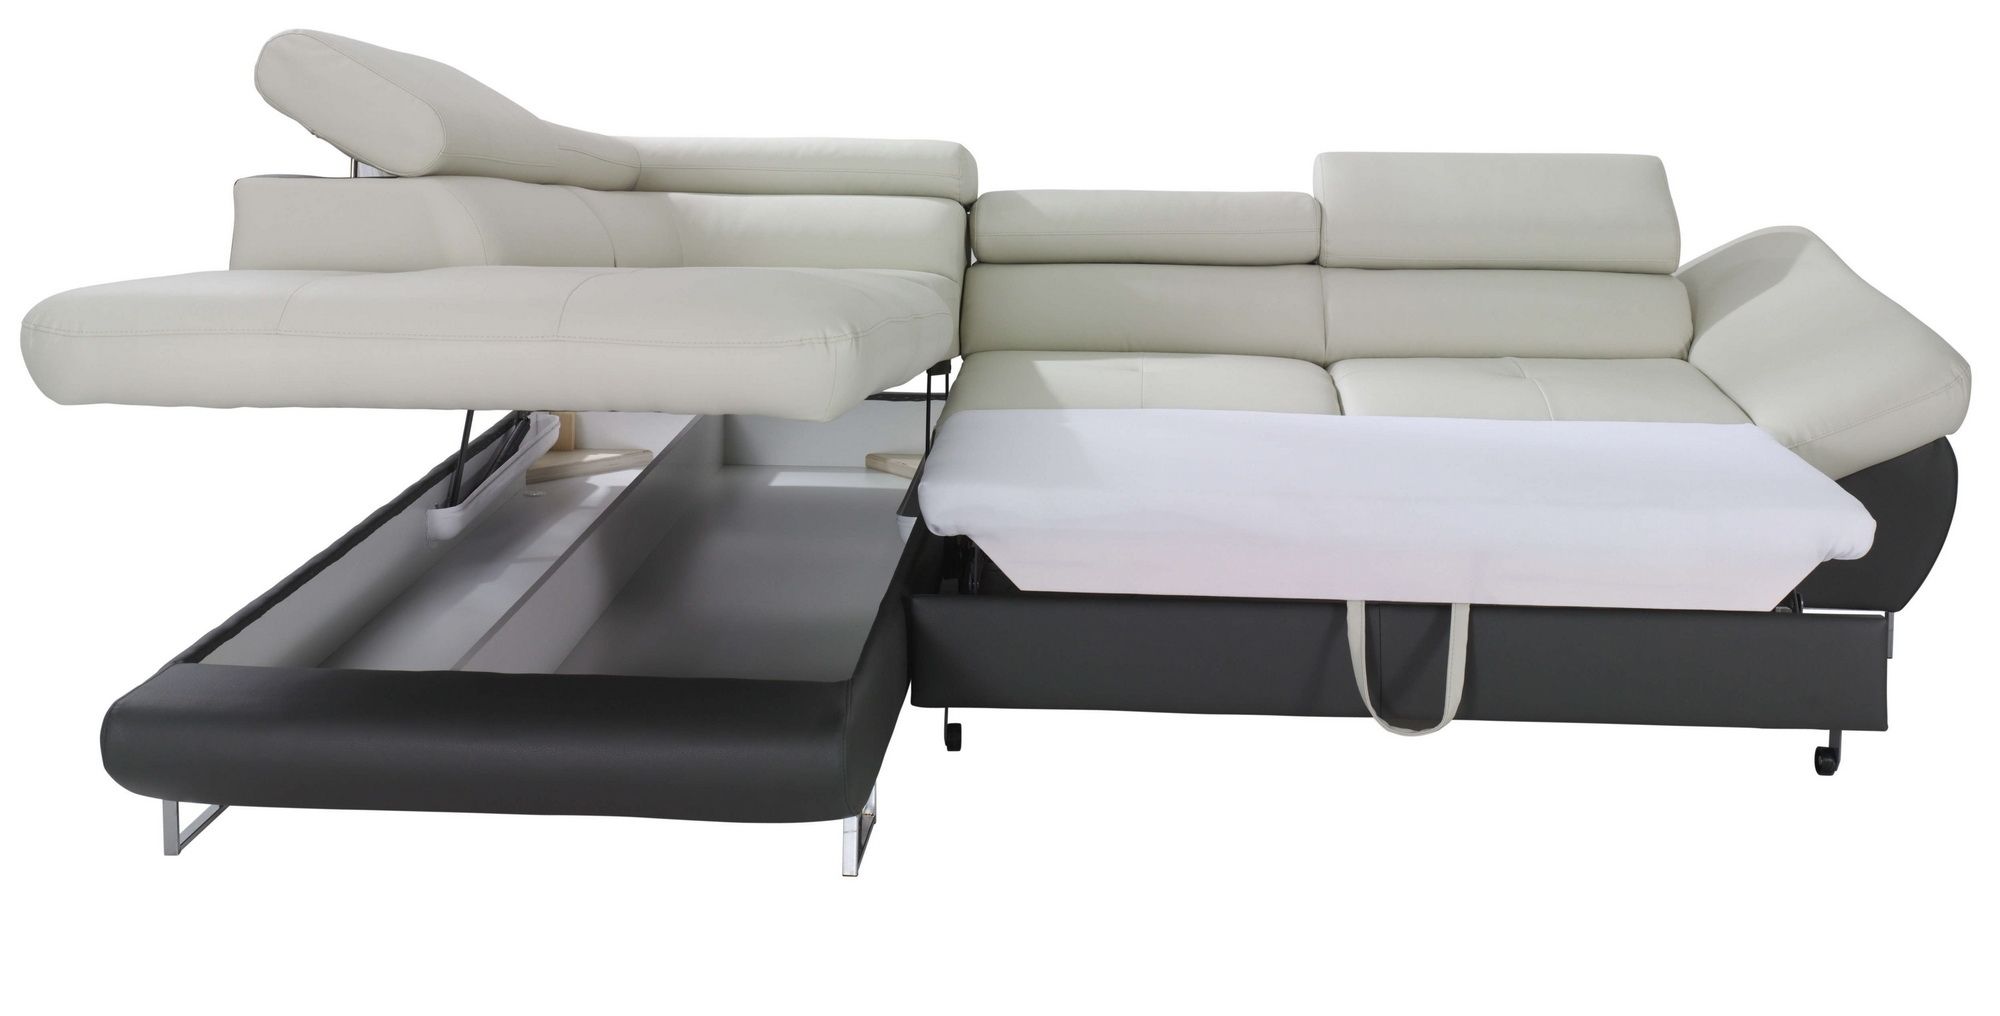 Fabio Sectional Sofa Sleeper With Storage, Creative Furniture Throughout Sectional Sofas With Storage (Photo 6183 of 7825)